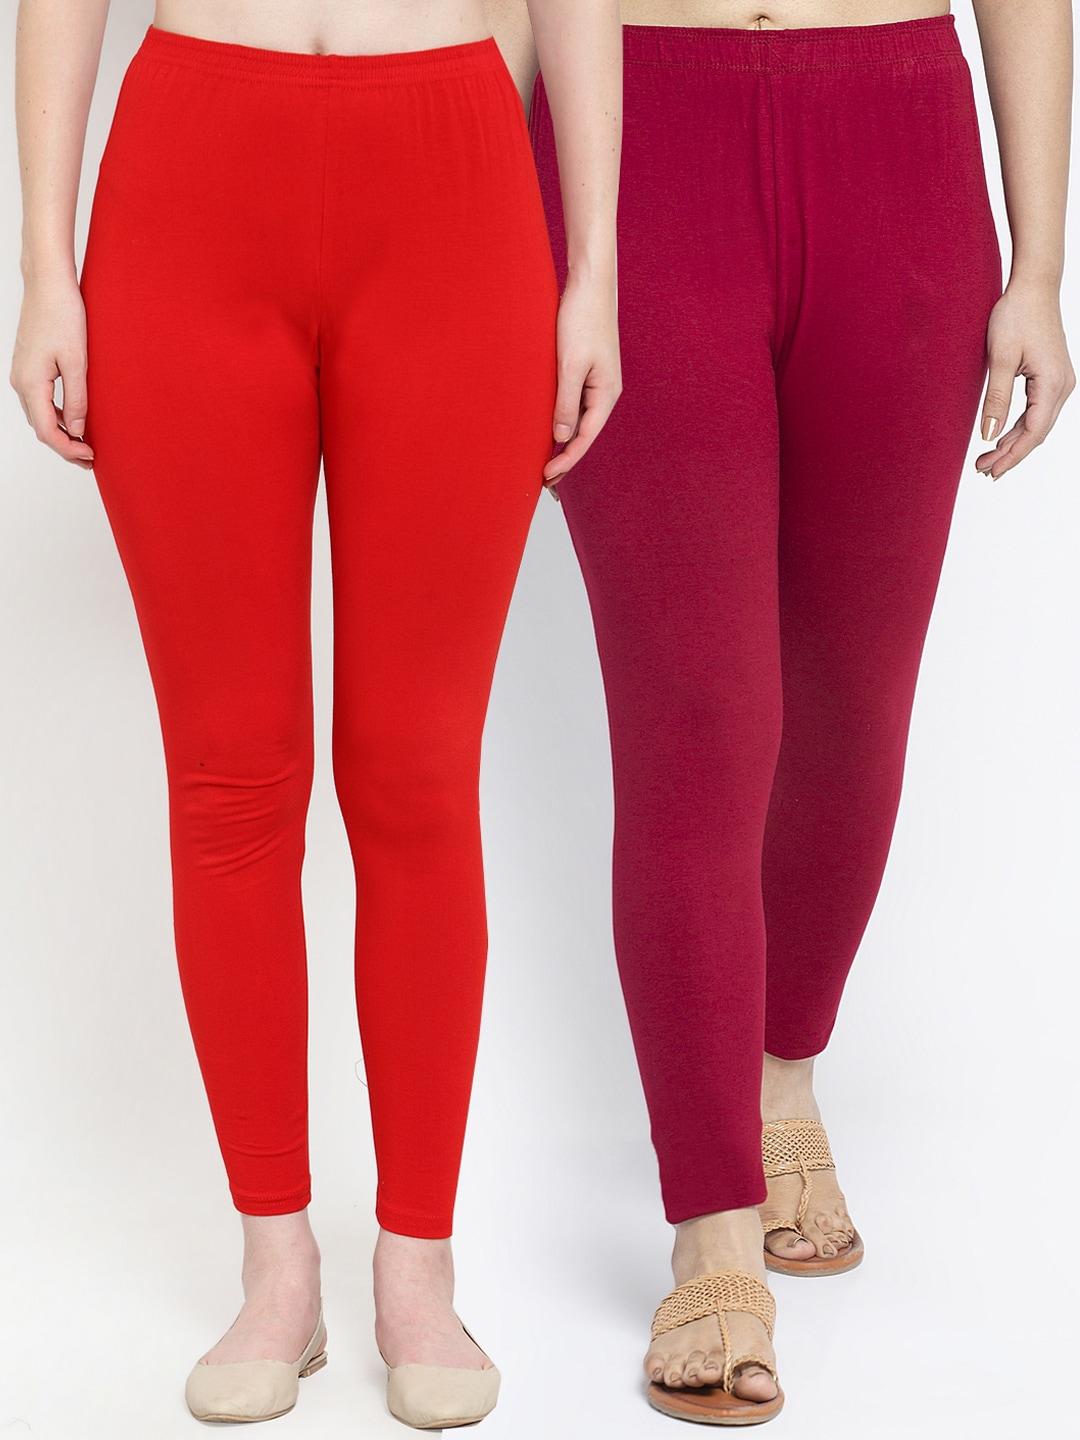 GRACIT Women Pack Of 2 Red & Maroon Combed Cotton Leggings